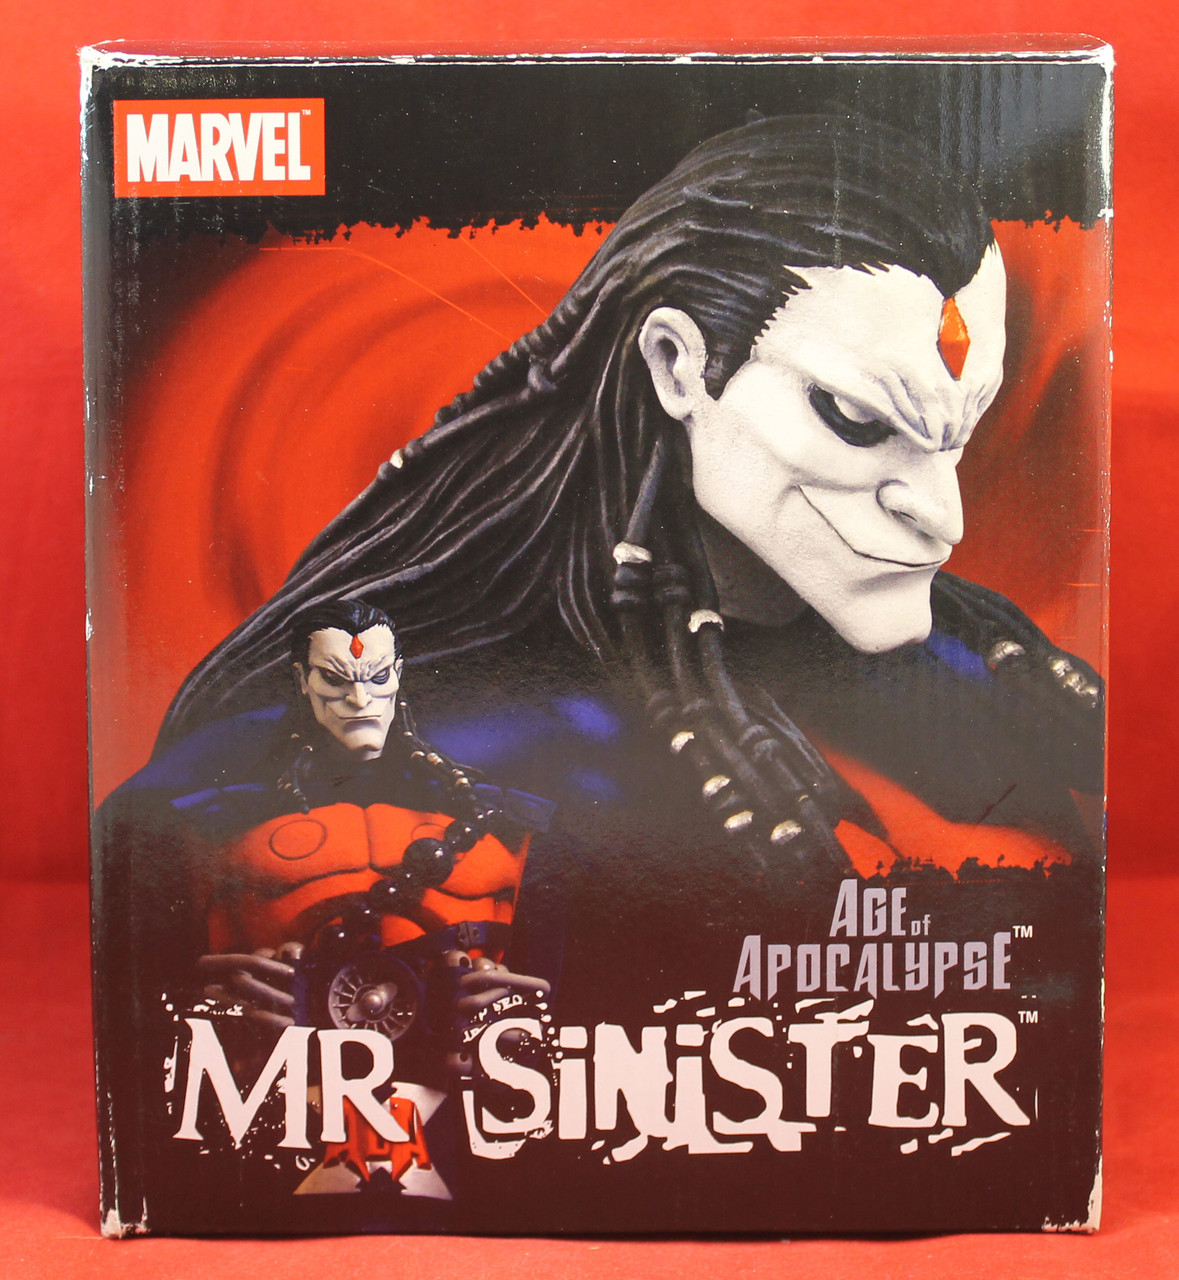 Marvel Universe Bust Statue 6" #0134 of 2500 - Age of Apocalypse Mr. Sinister